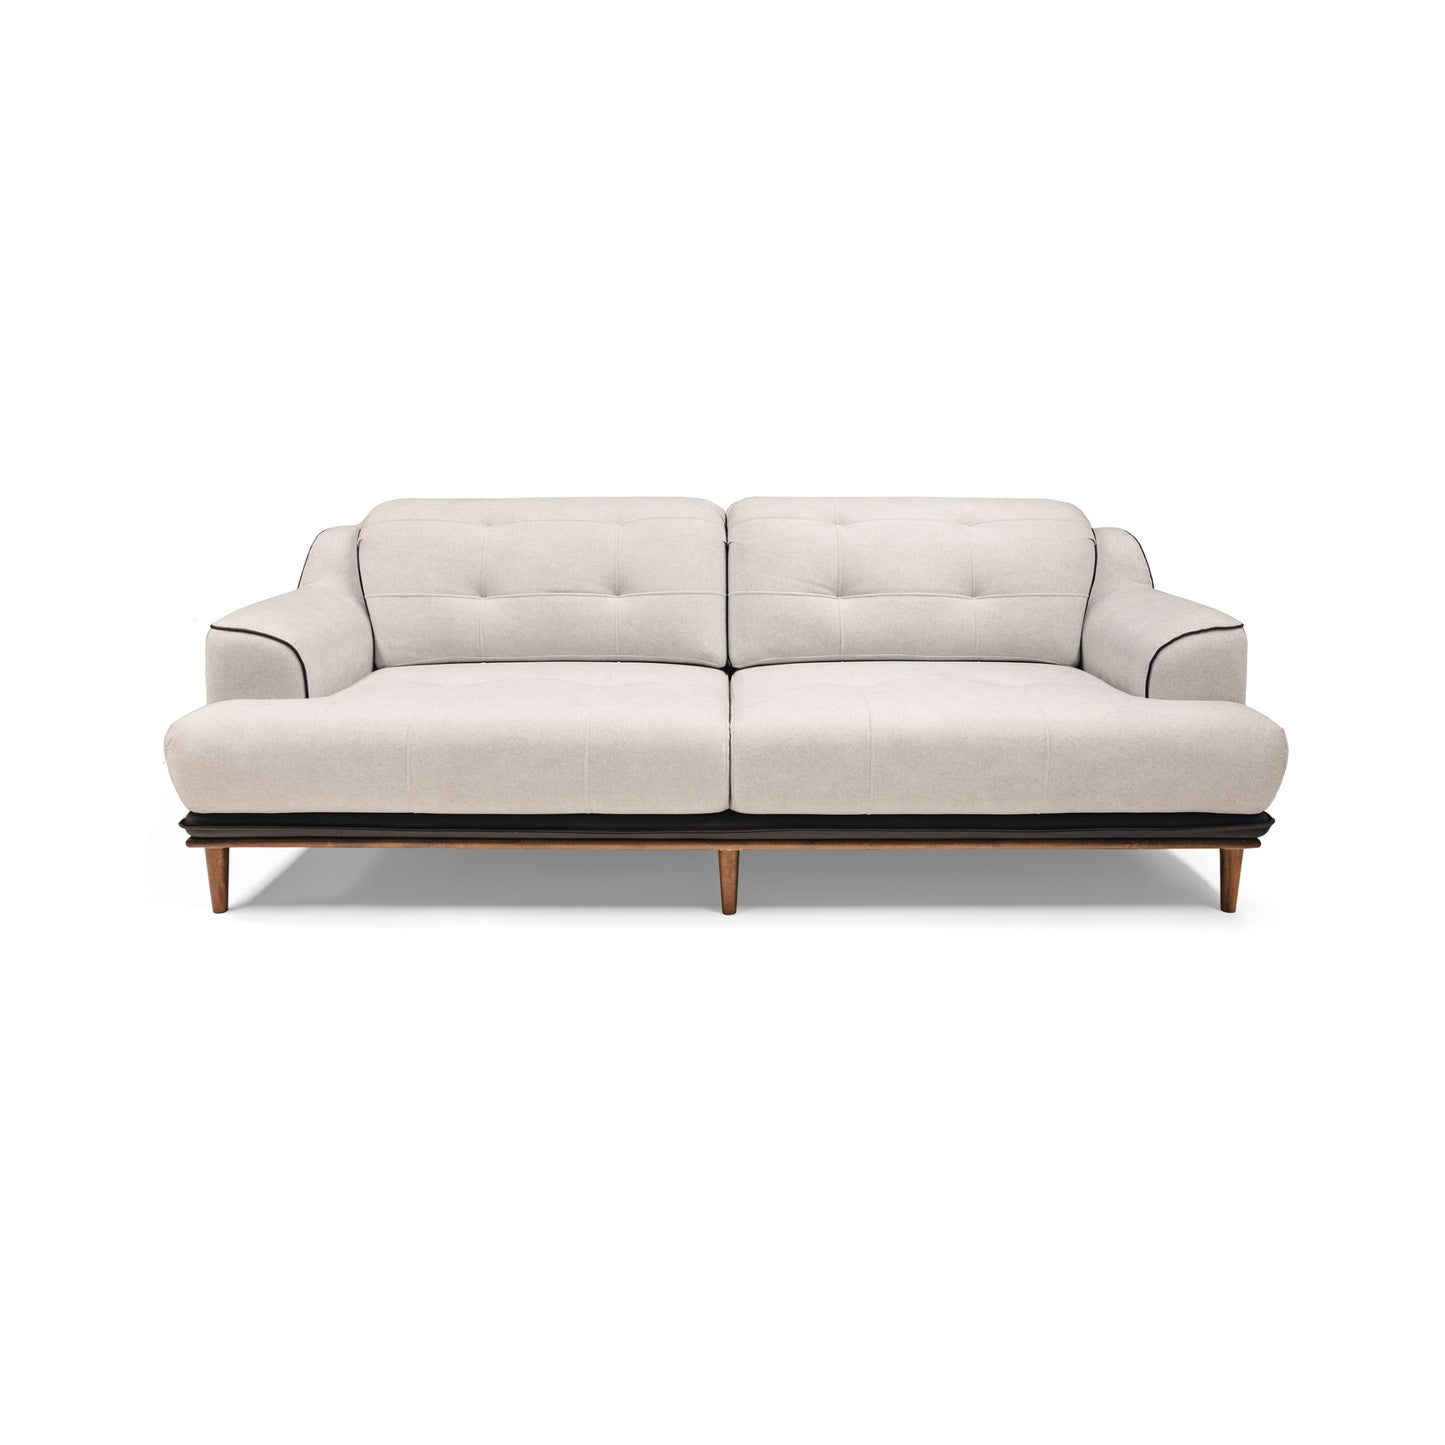 The Ridley Large Sofa